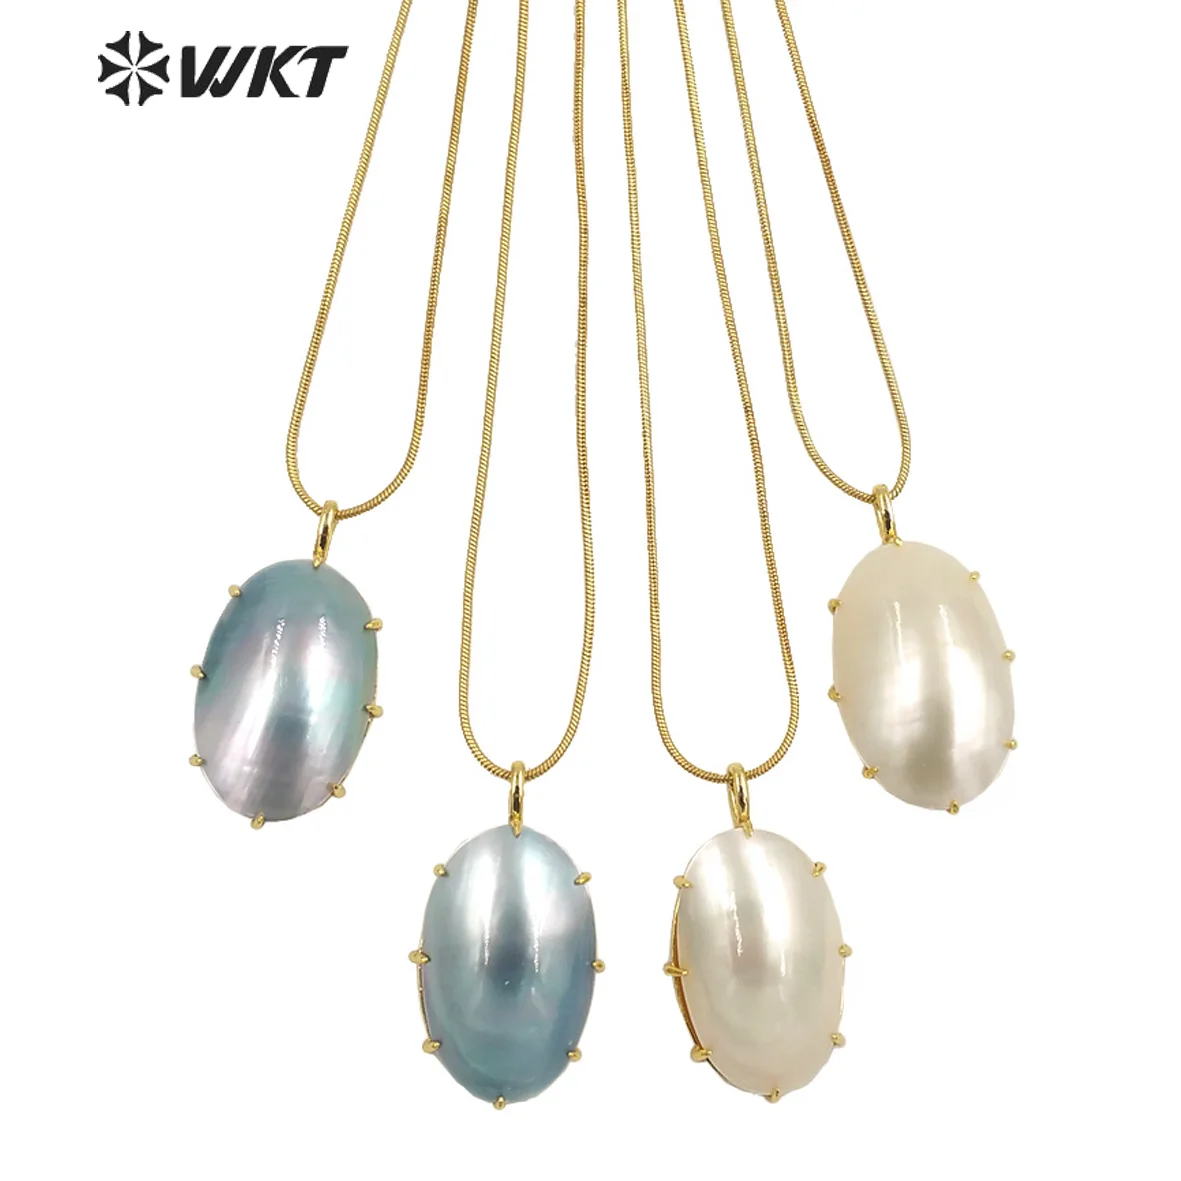 

WT-JN250 Gorgeous Women Fashion 18k Real Gold Plated Oval Mabe Shell Pendant Necklace With Claw Setting